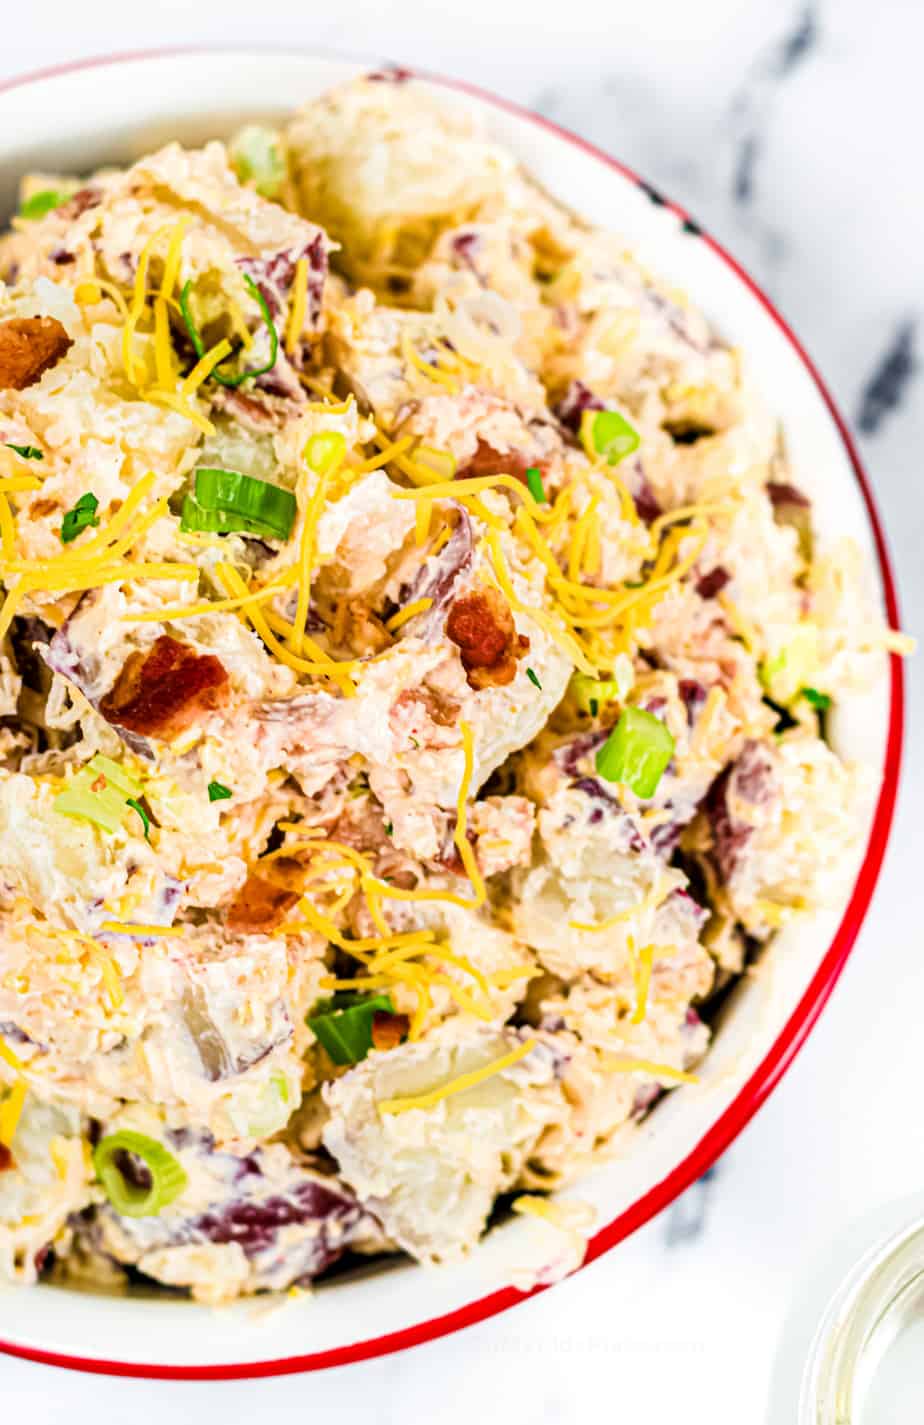 Loaded potato salad in a bowl